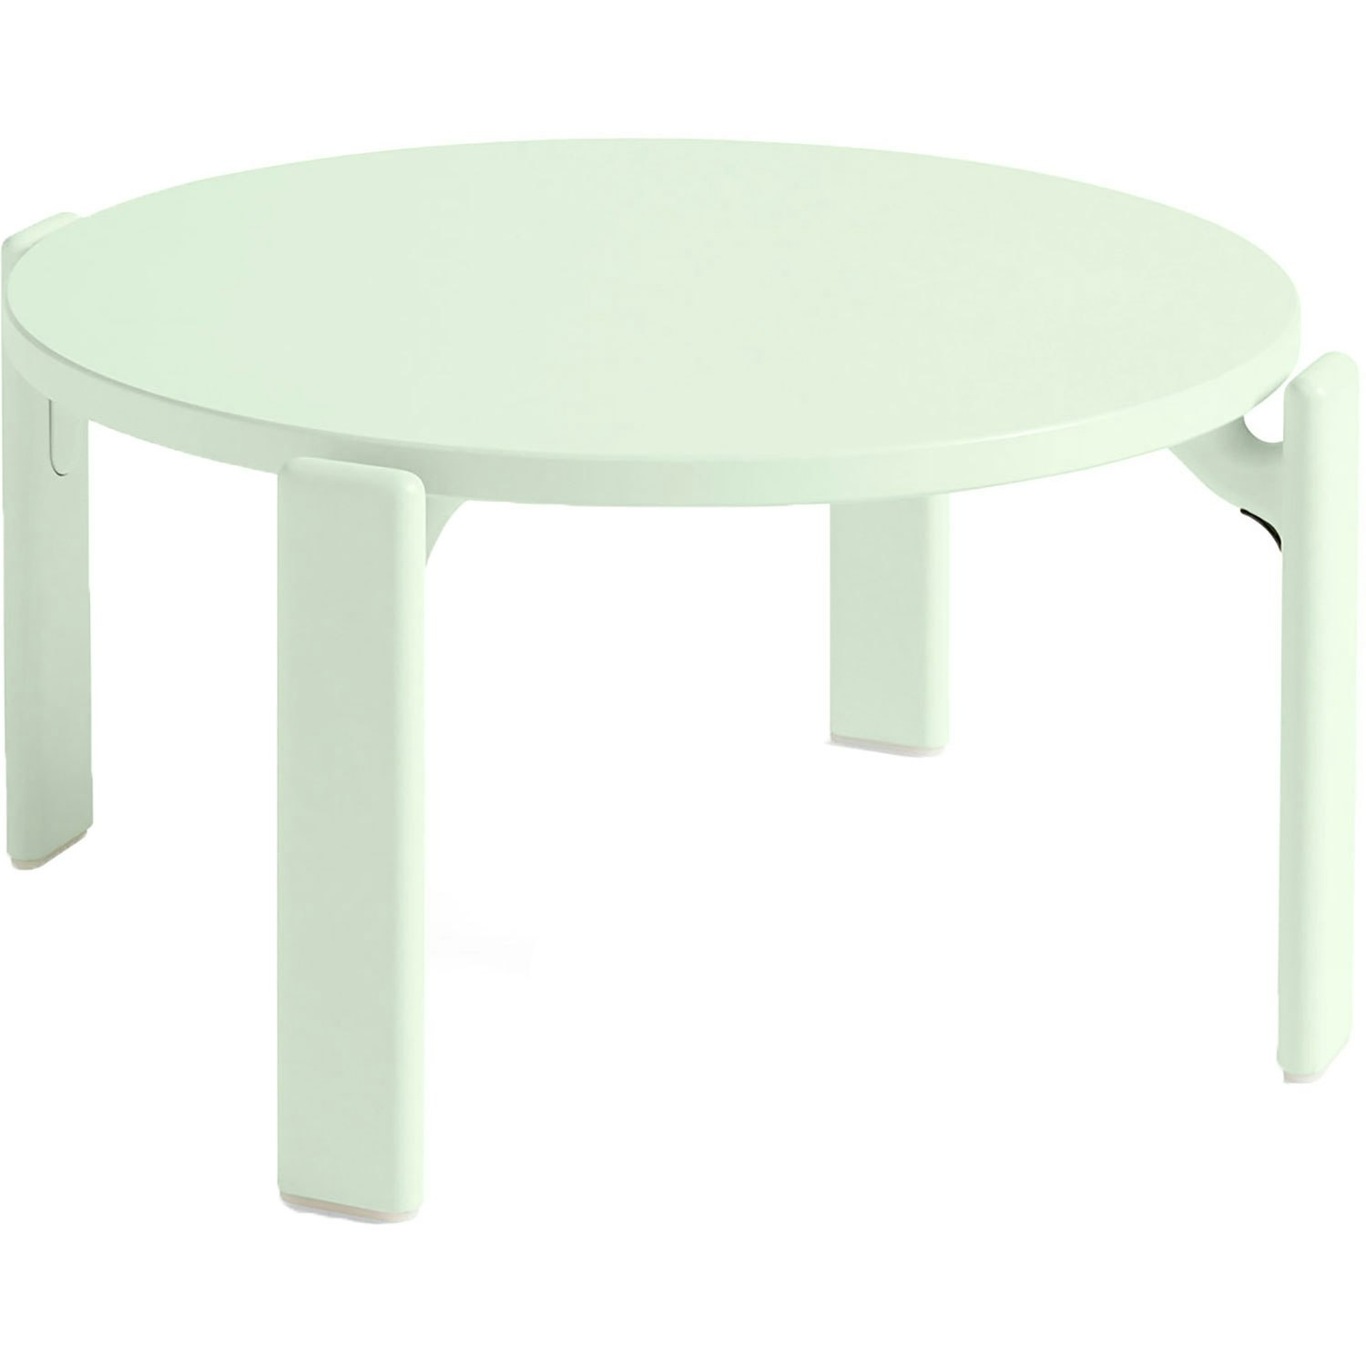 Rey Coffee Table, Soft Mint